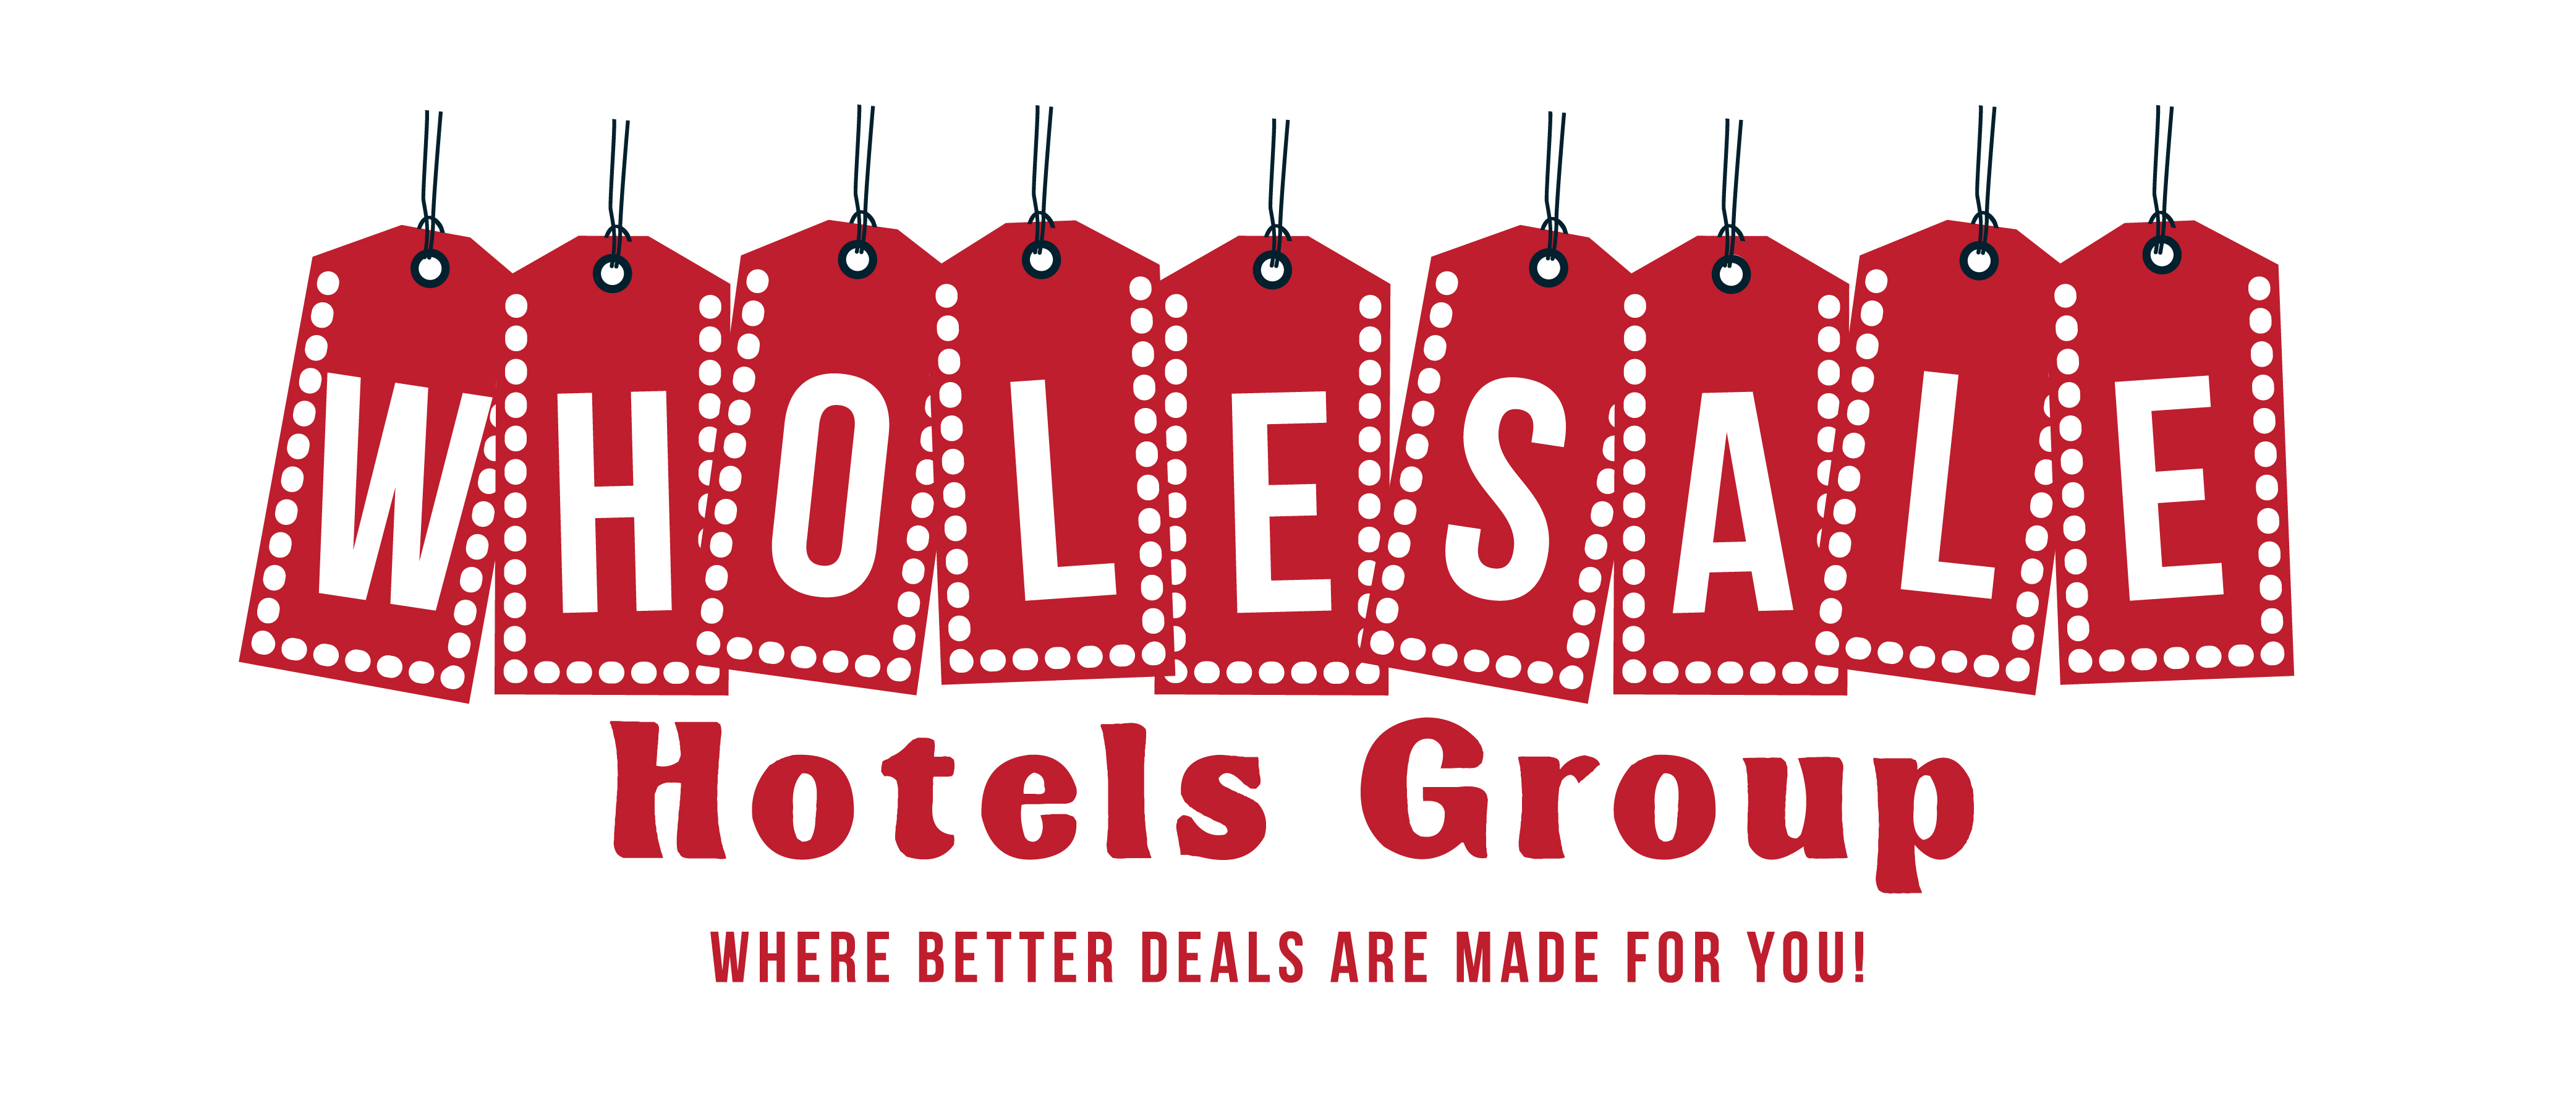 Wholesale Hotels Group - Travel Agency Services